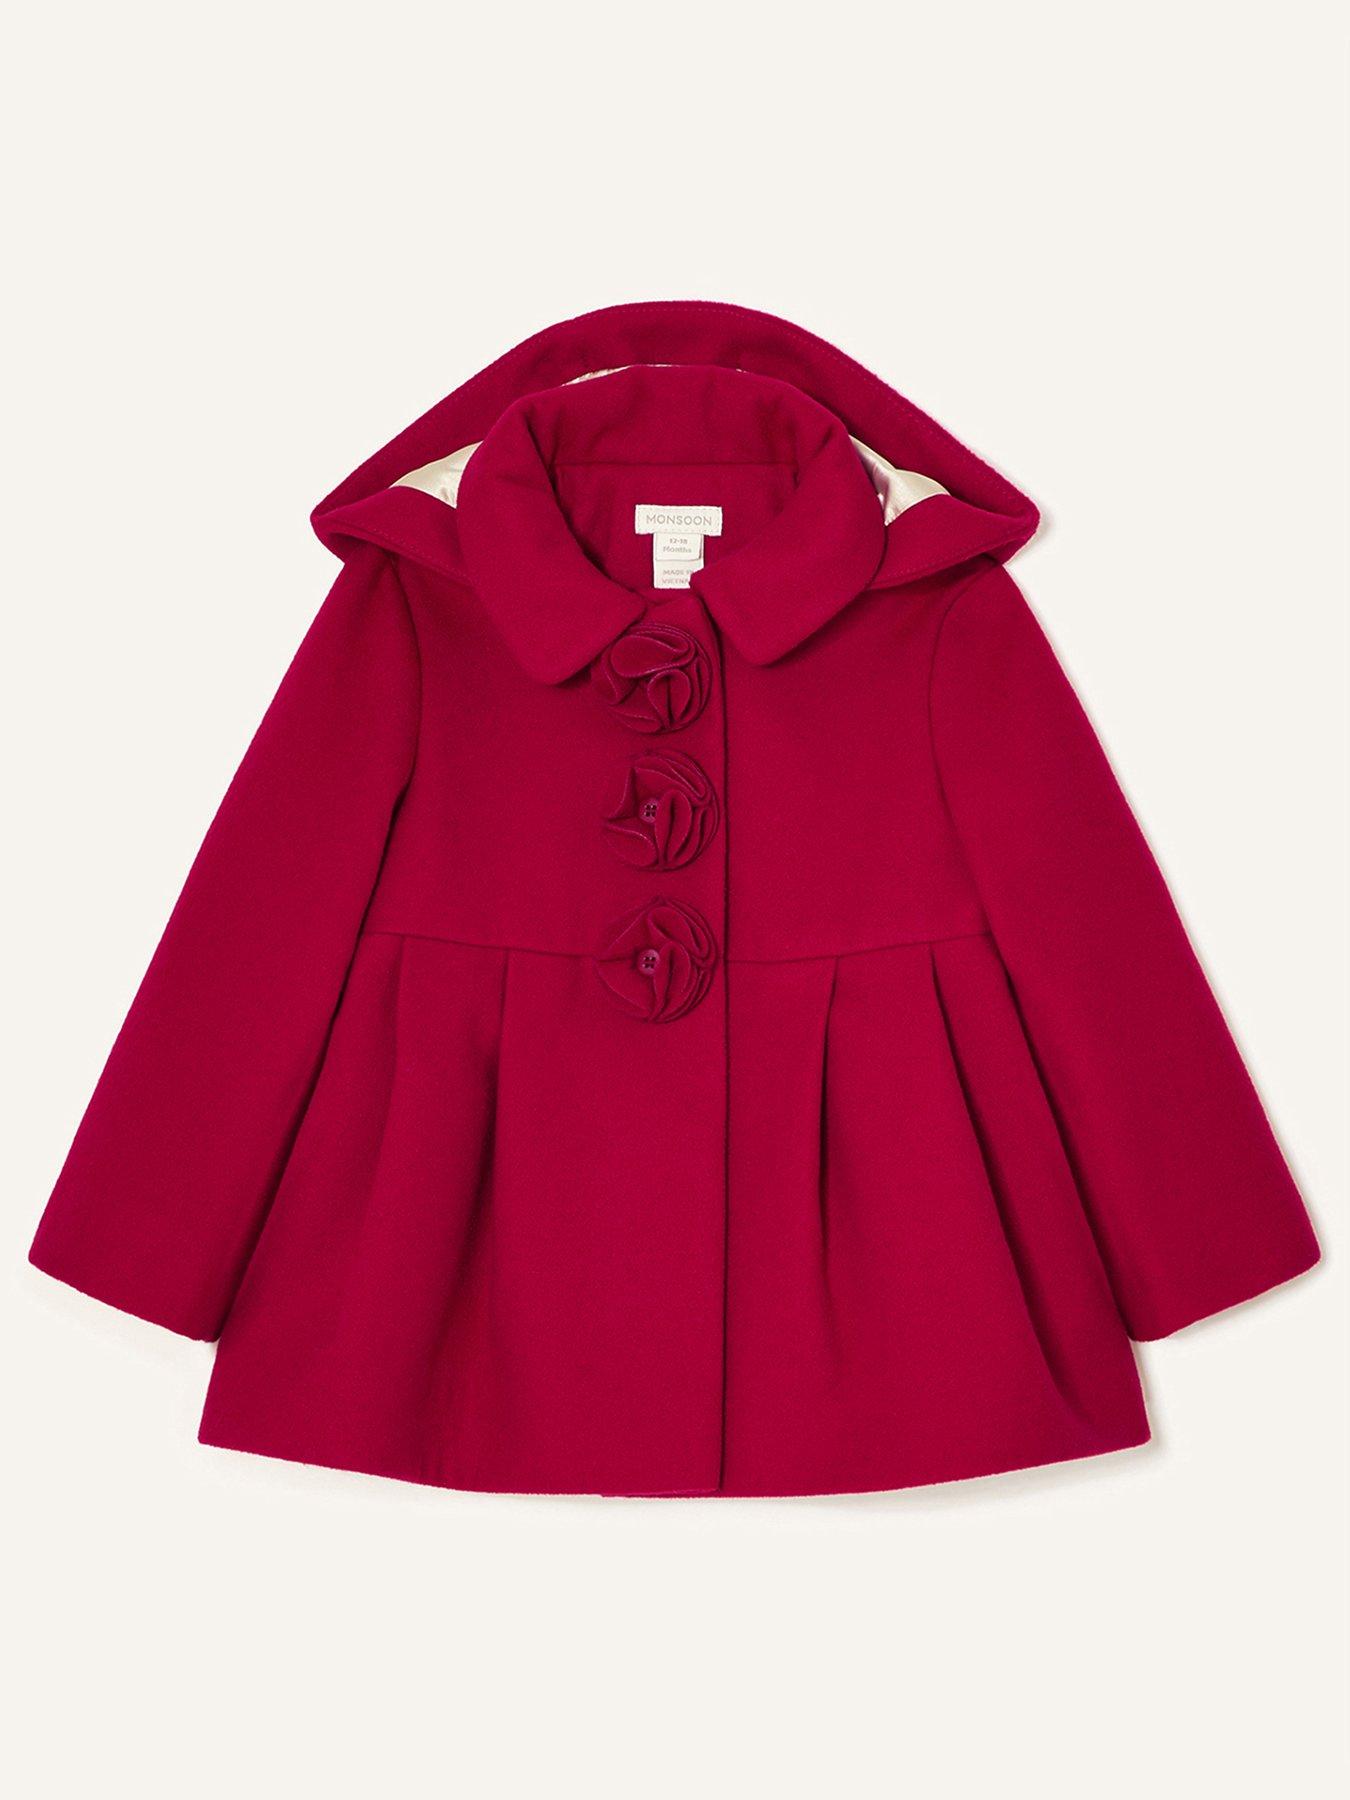  Baby Girls Corsage Button Swing Coat With Hood - Red